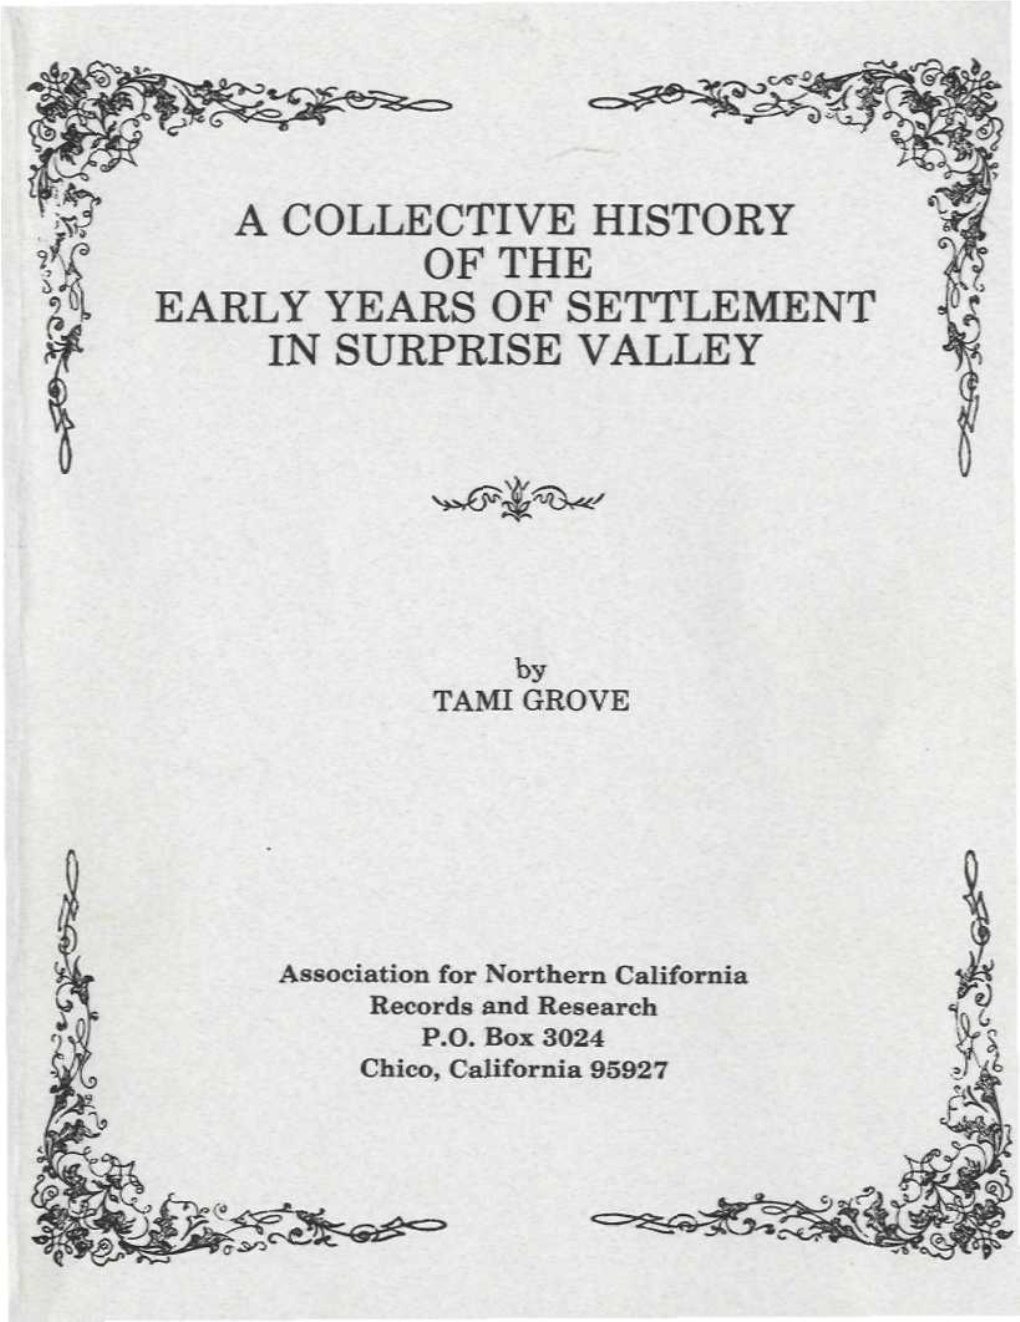 A Collective History of the Early Years of Settlement in Surprise Valley